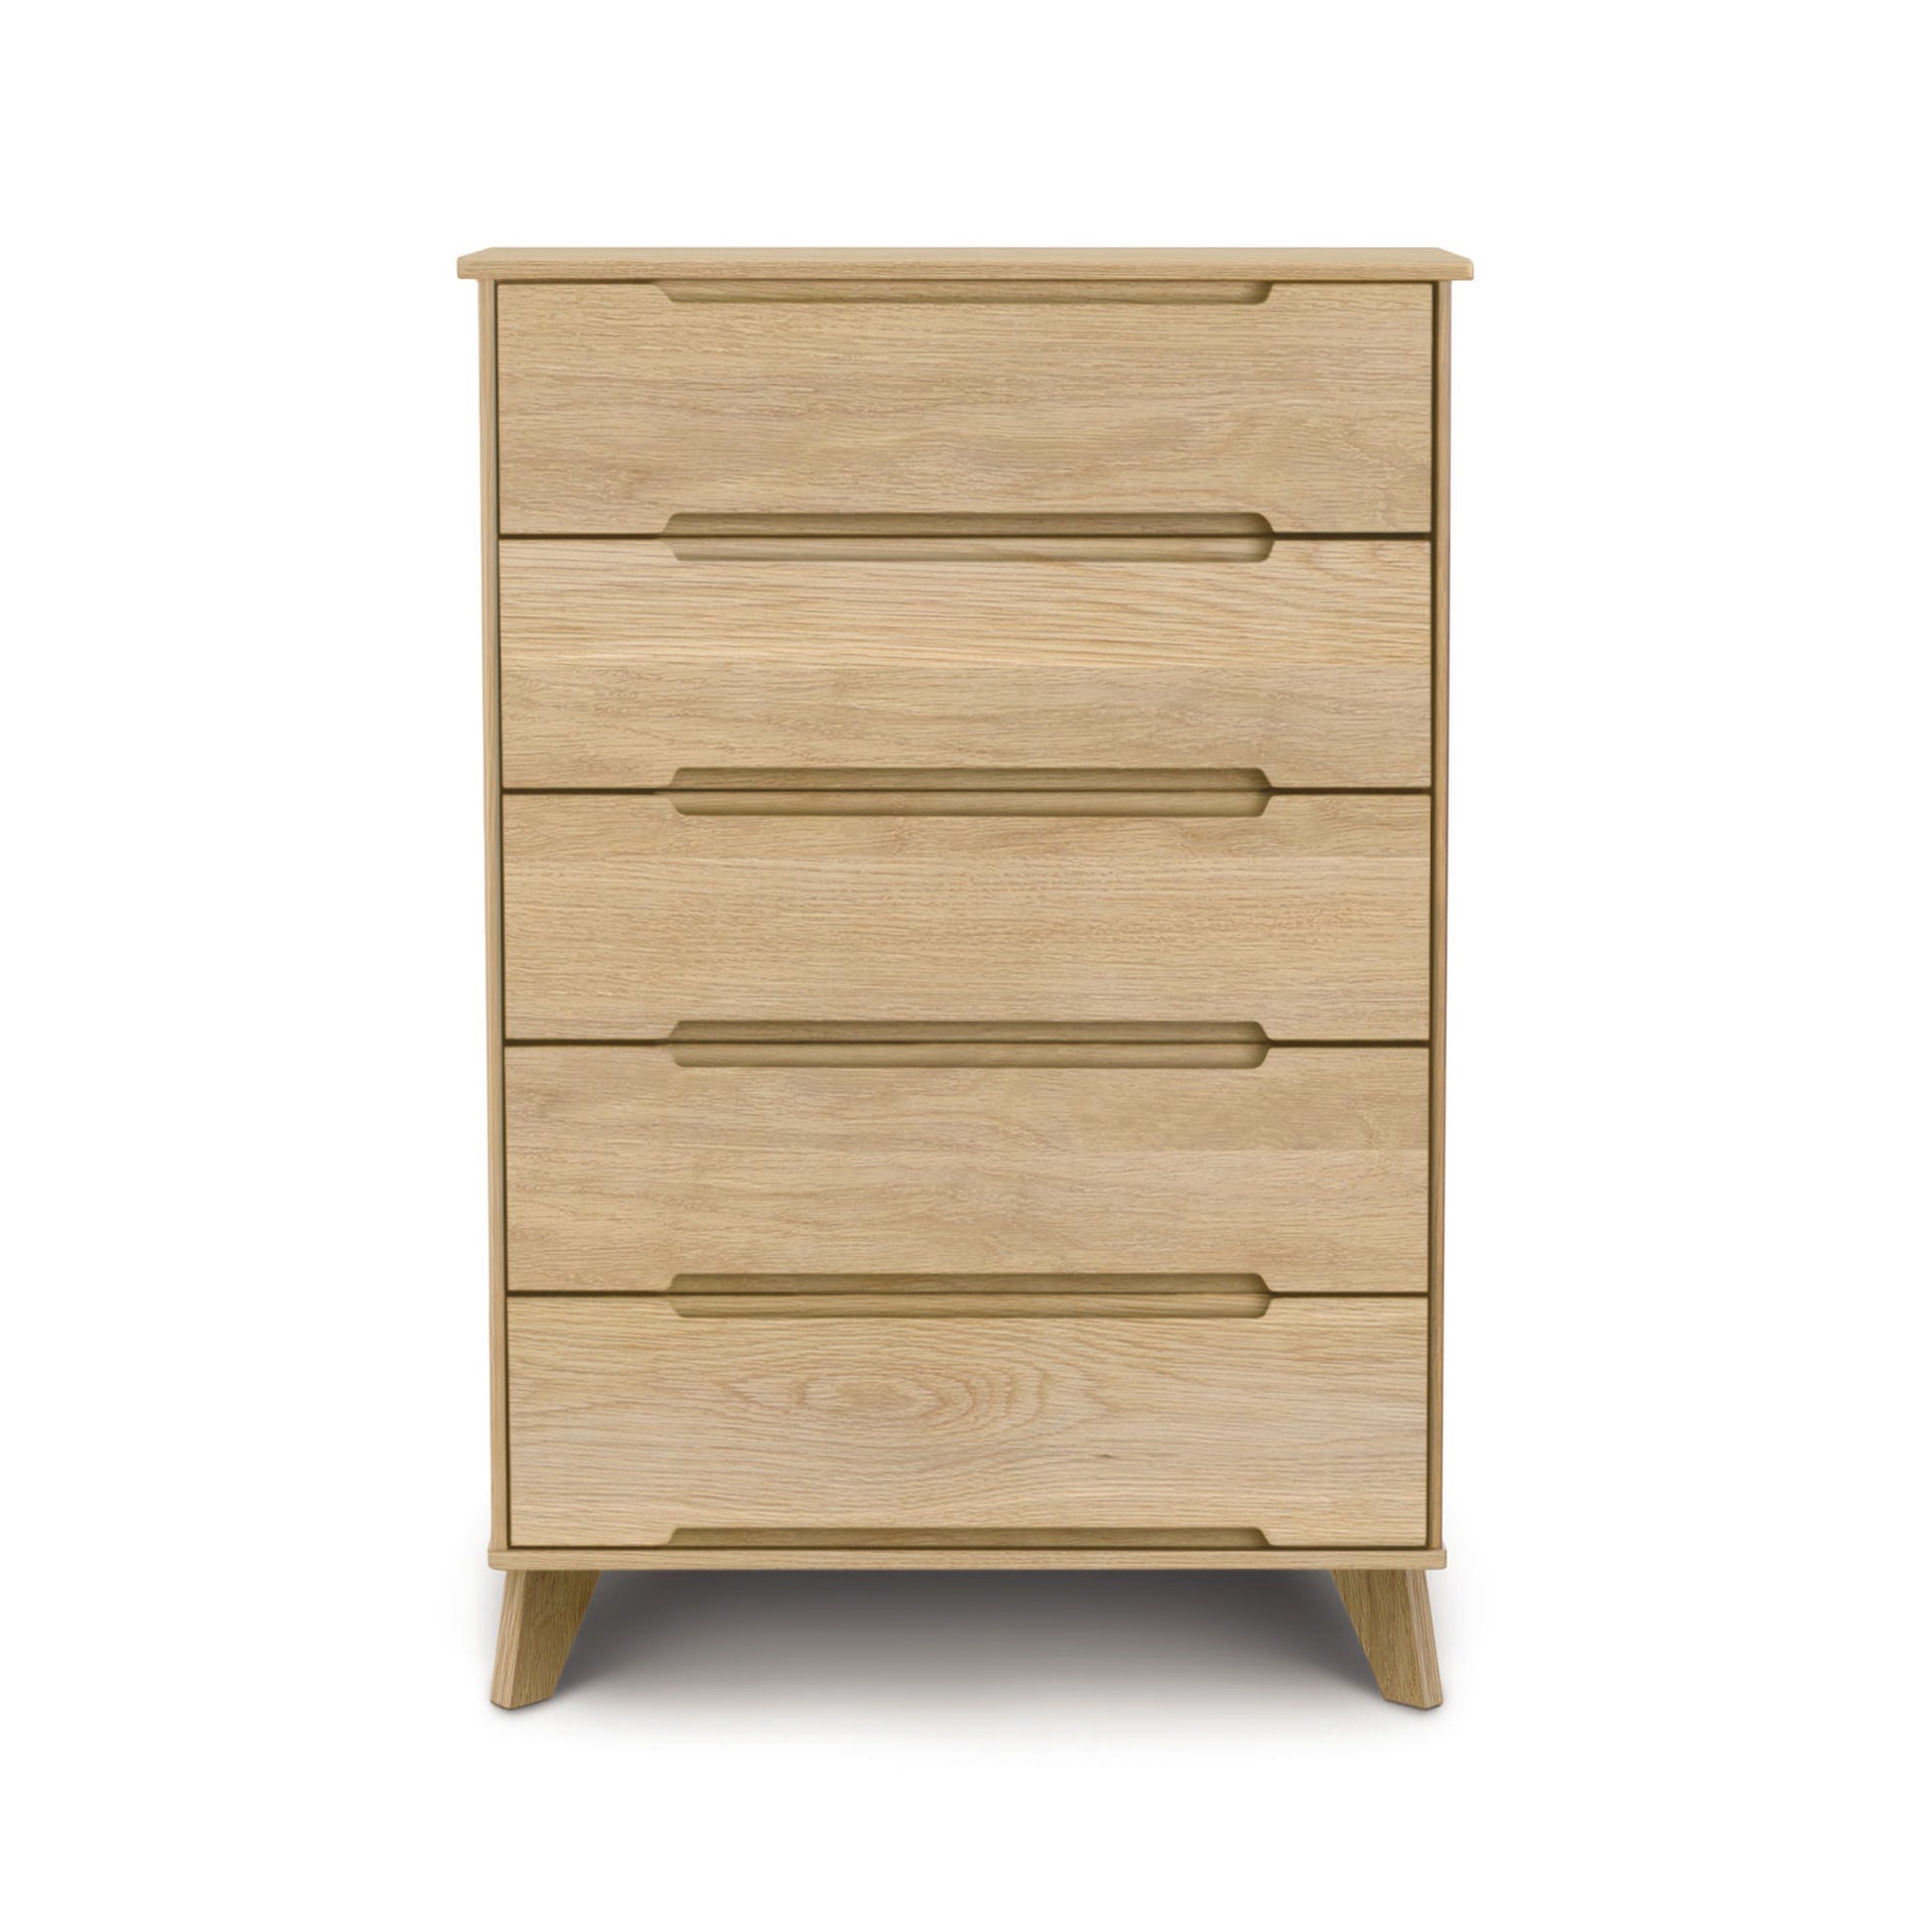 A Copeland Furniture Linn 5-Drawer Wide Chest - Oak - Clearance on a white background.